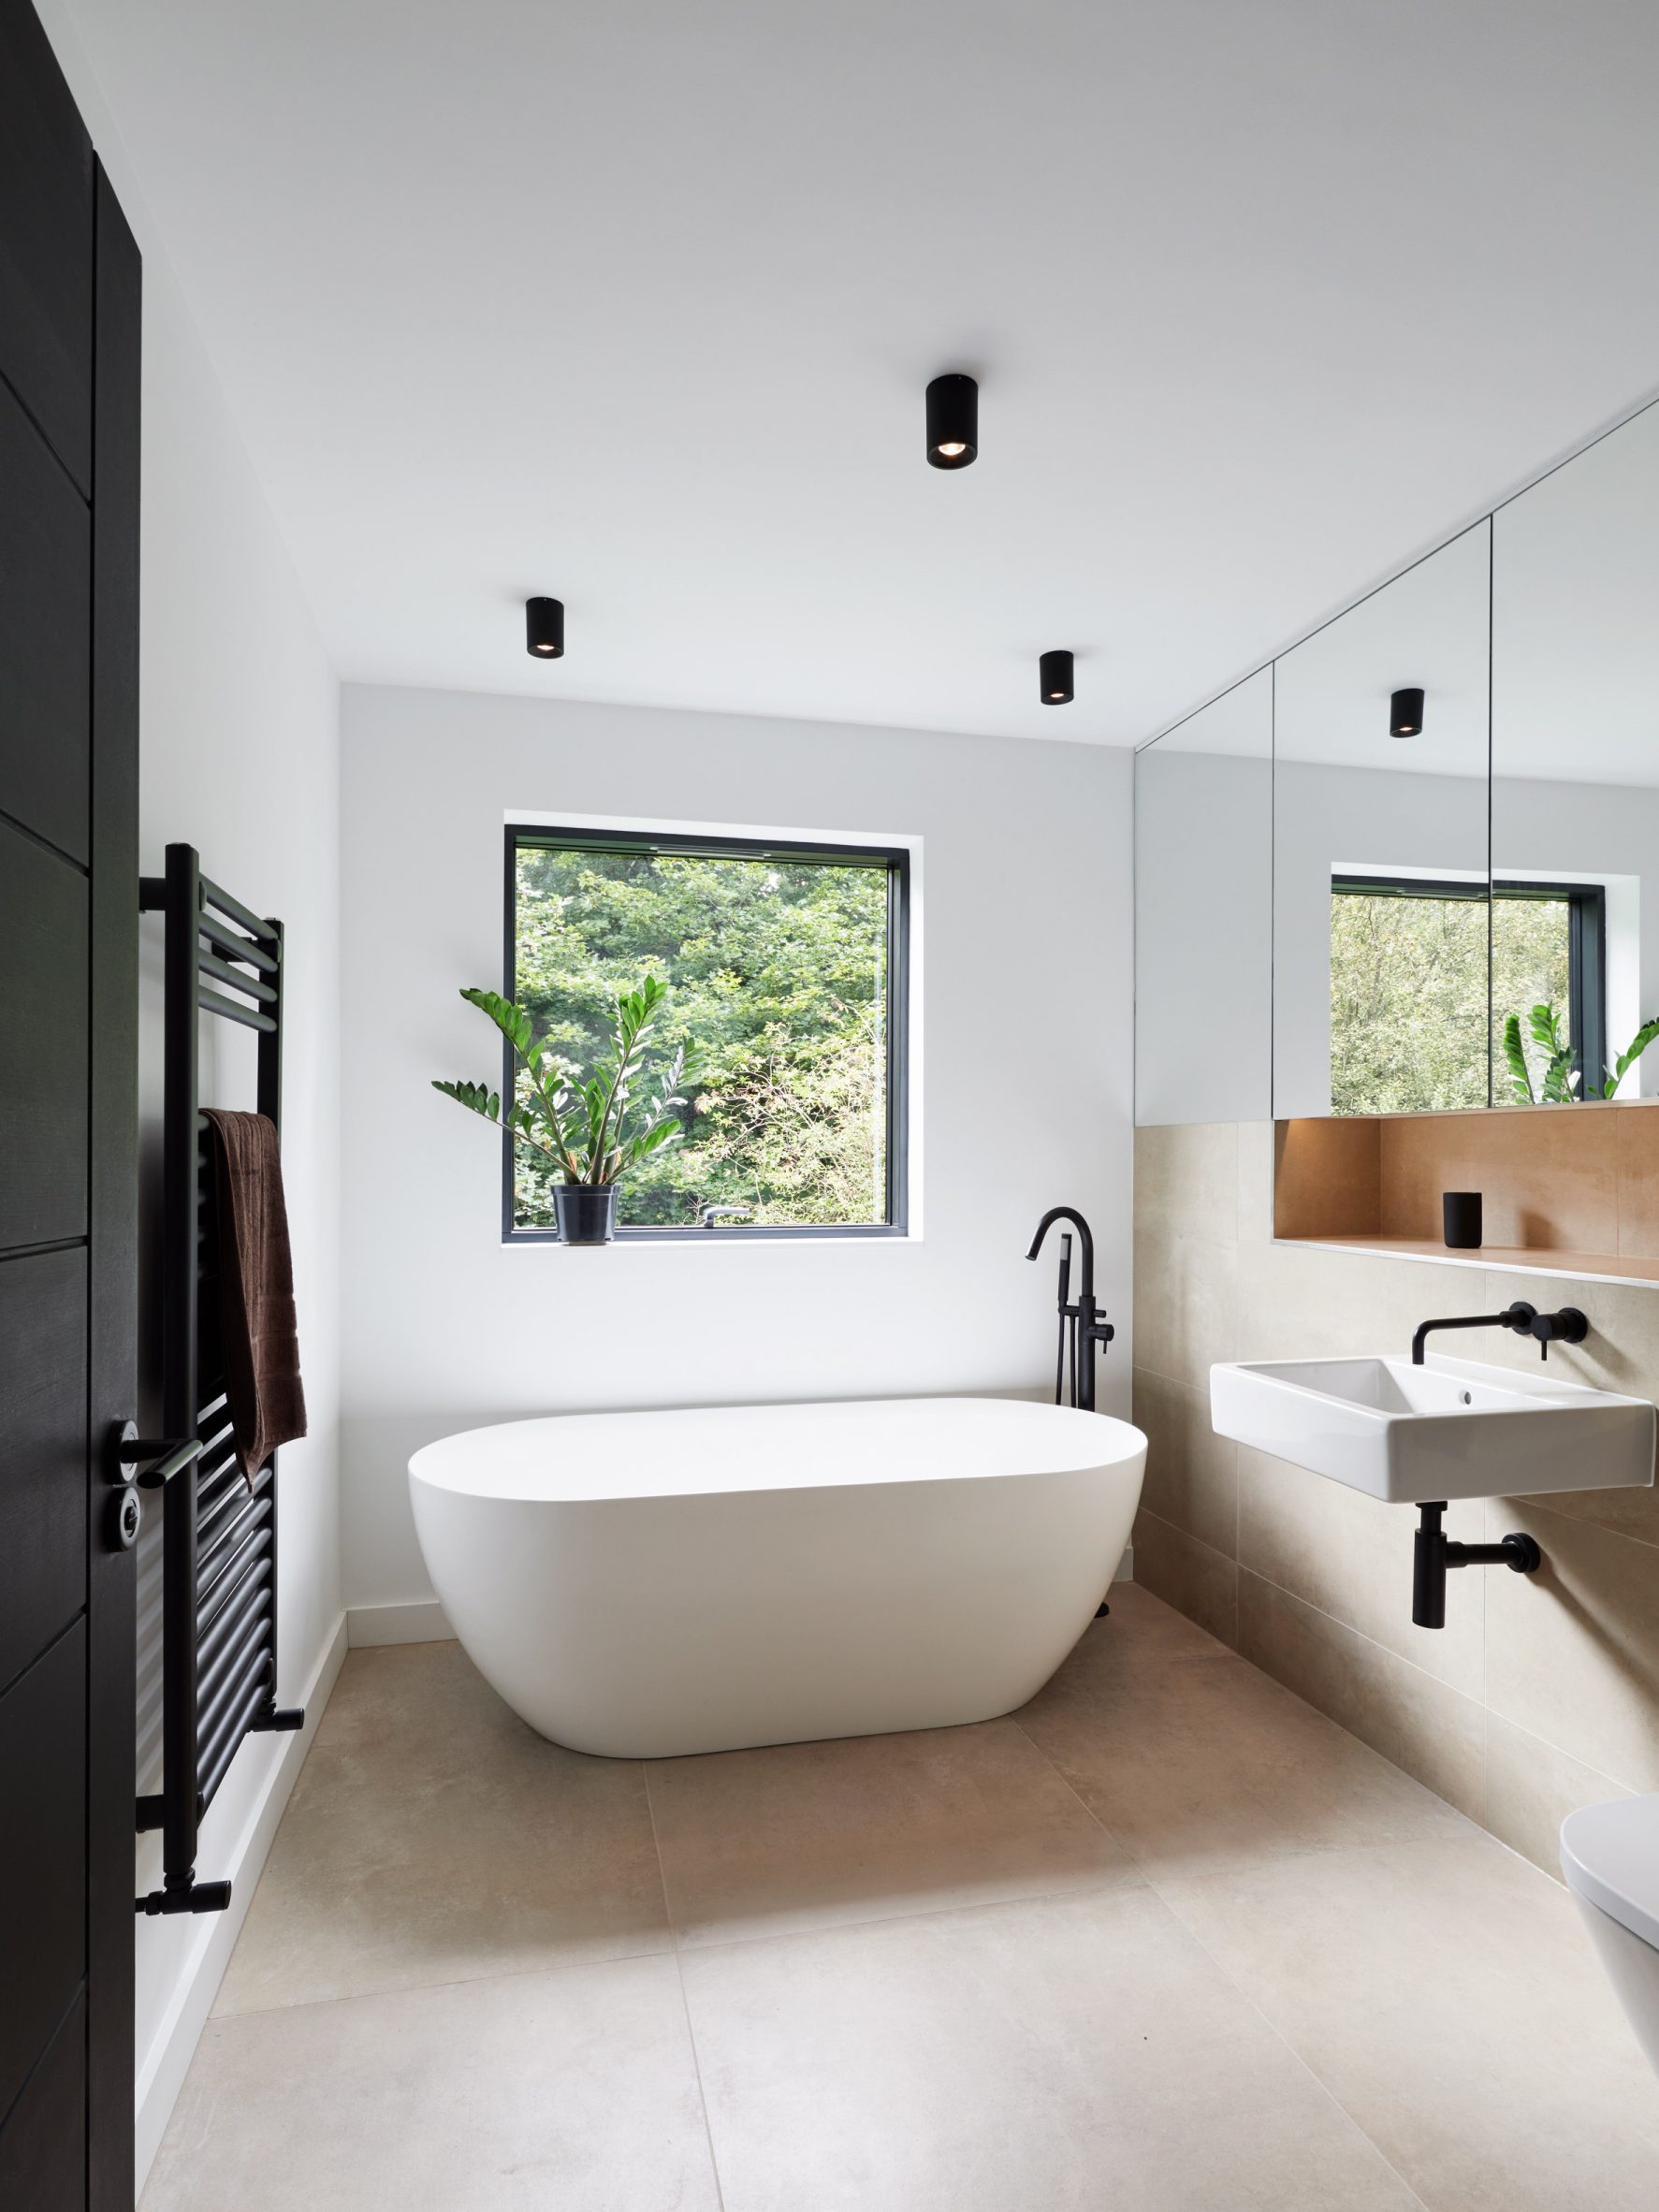 A white bathroom with a freestanding tub